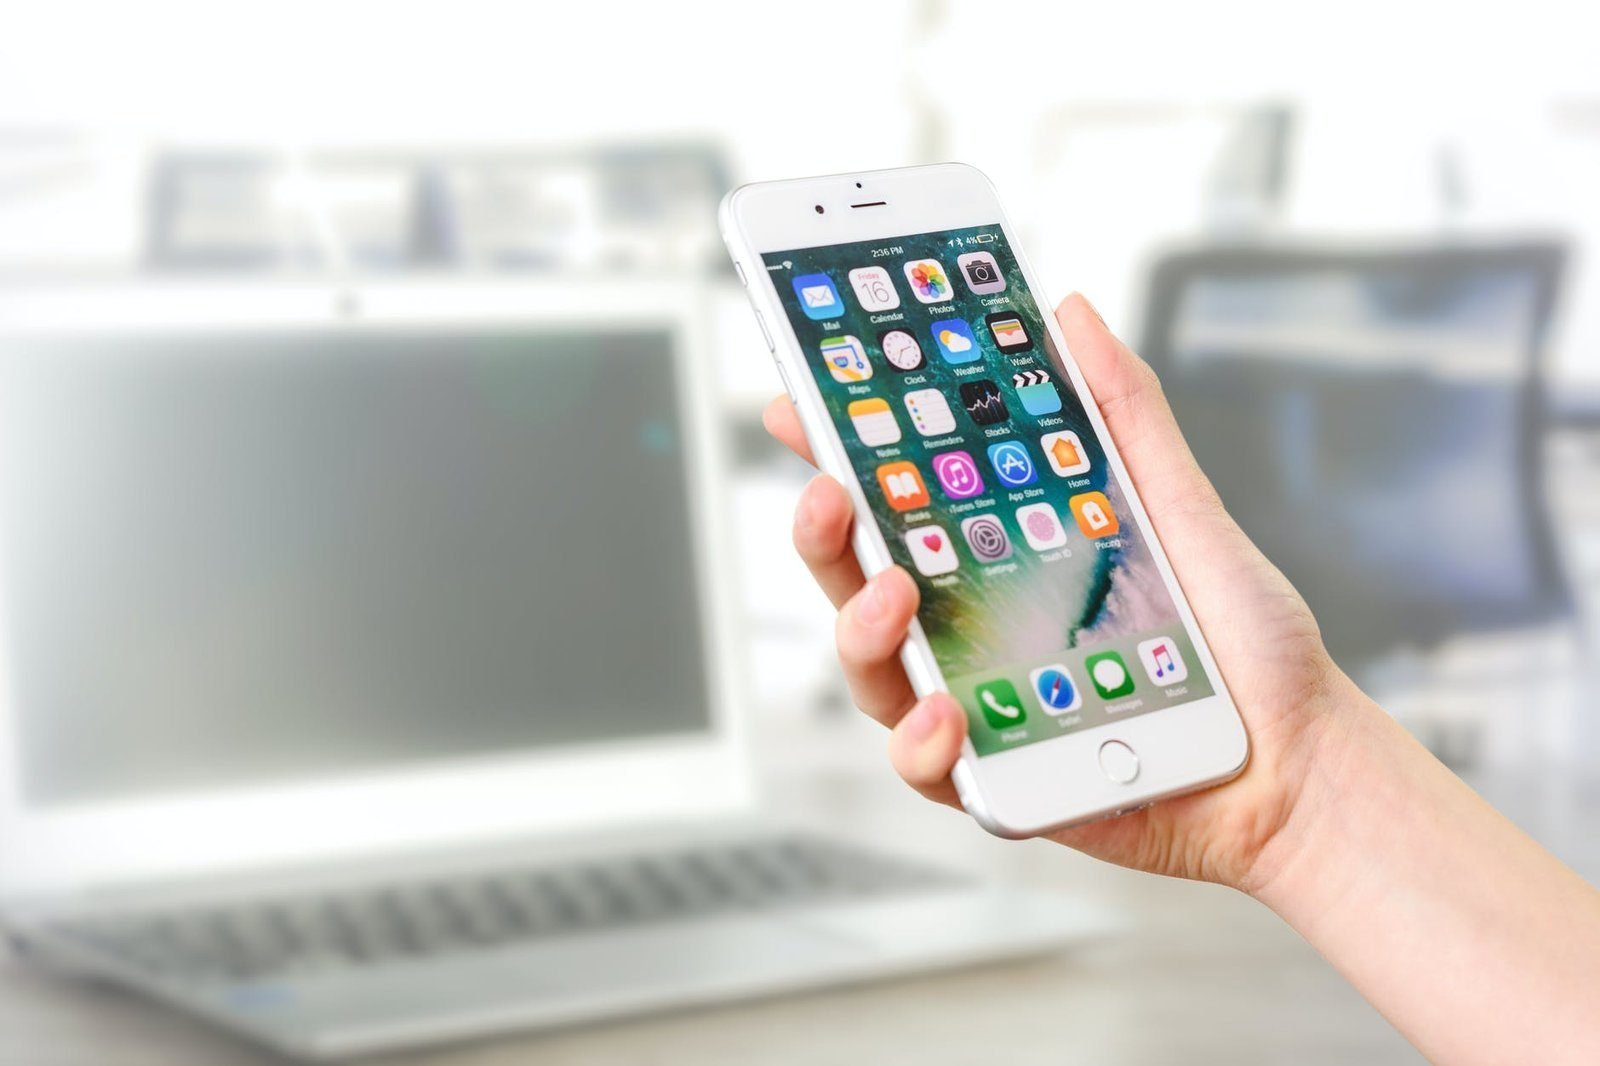 What Makes Hybrid Approach An Excellent Choice For Mobile App Development?